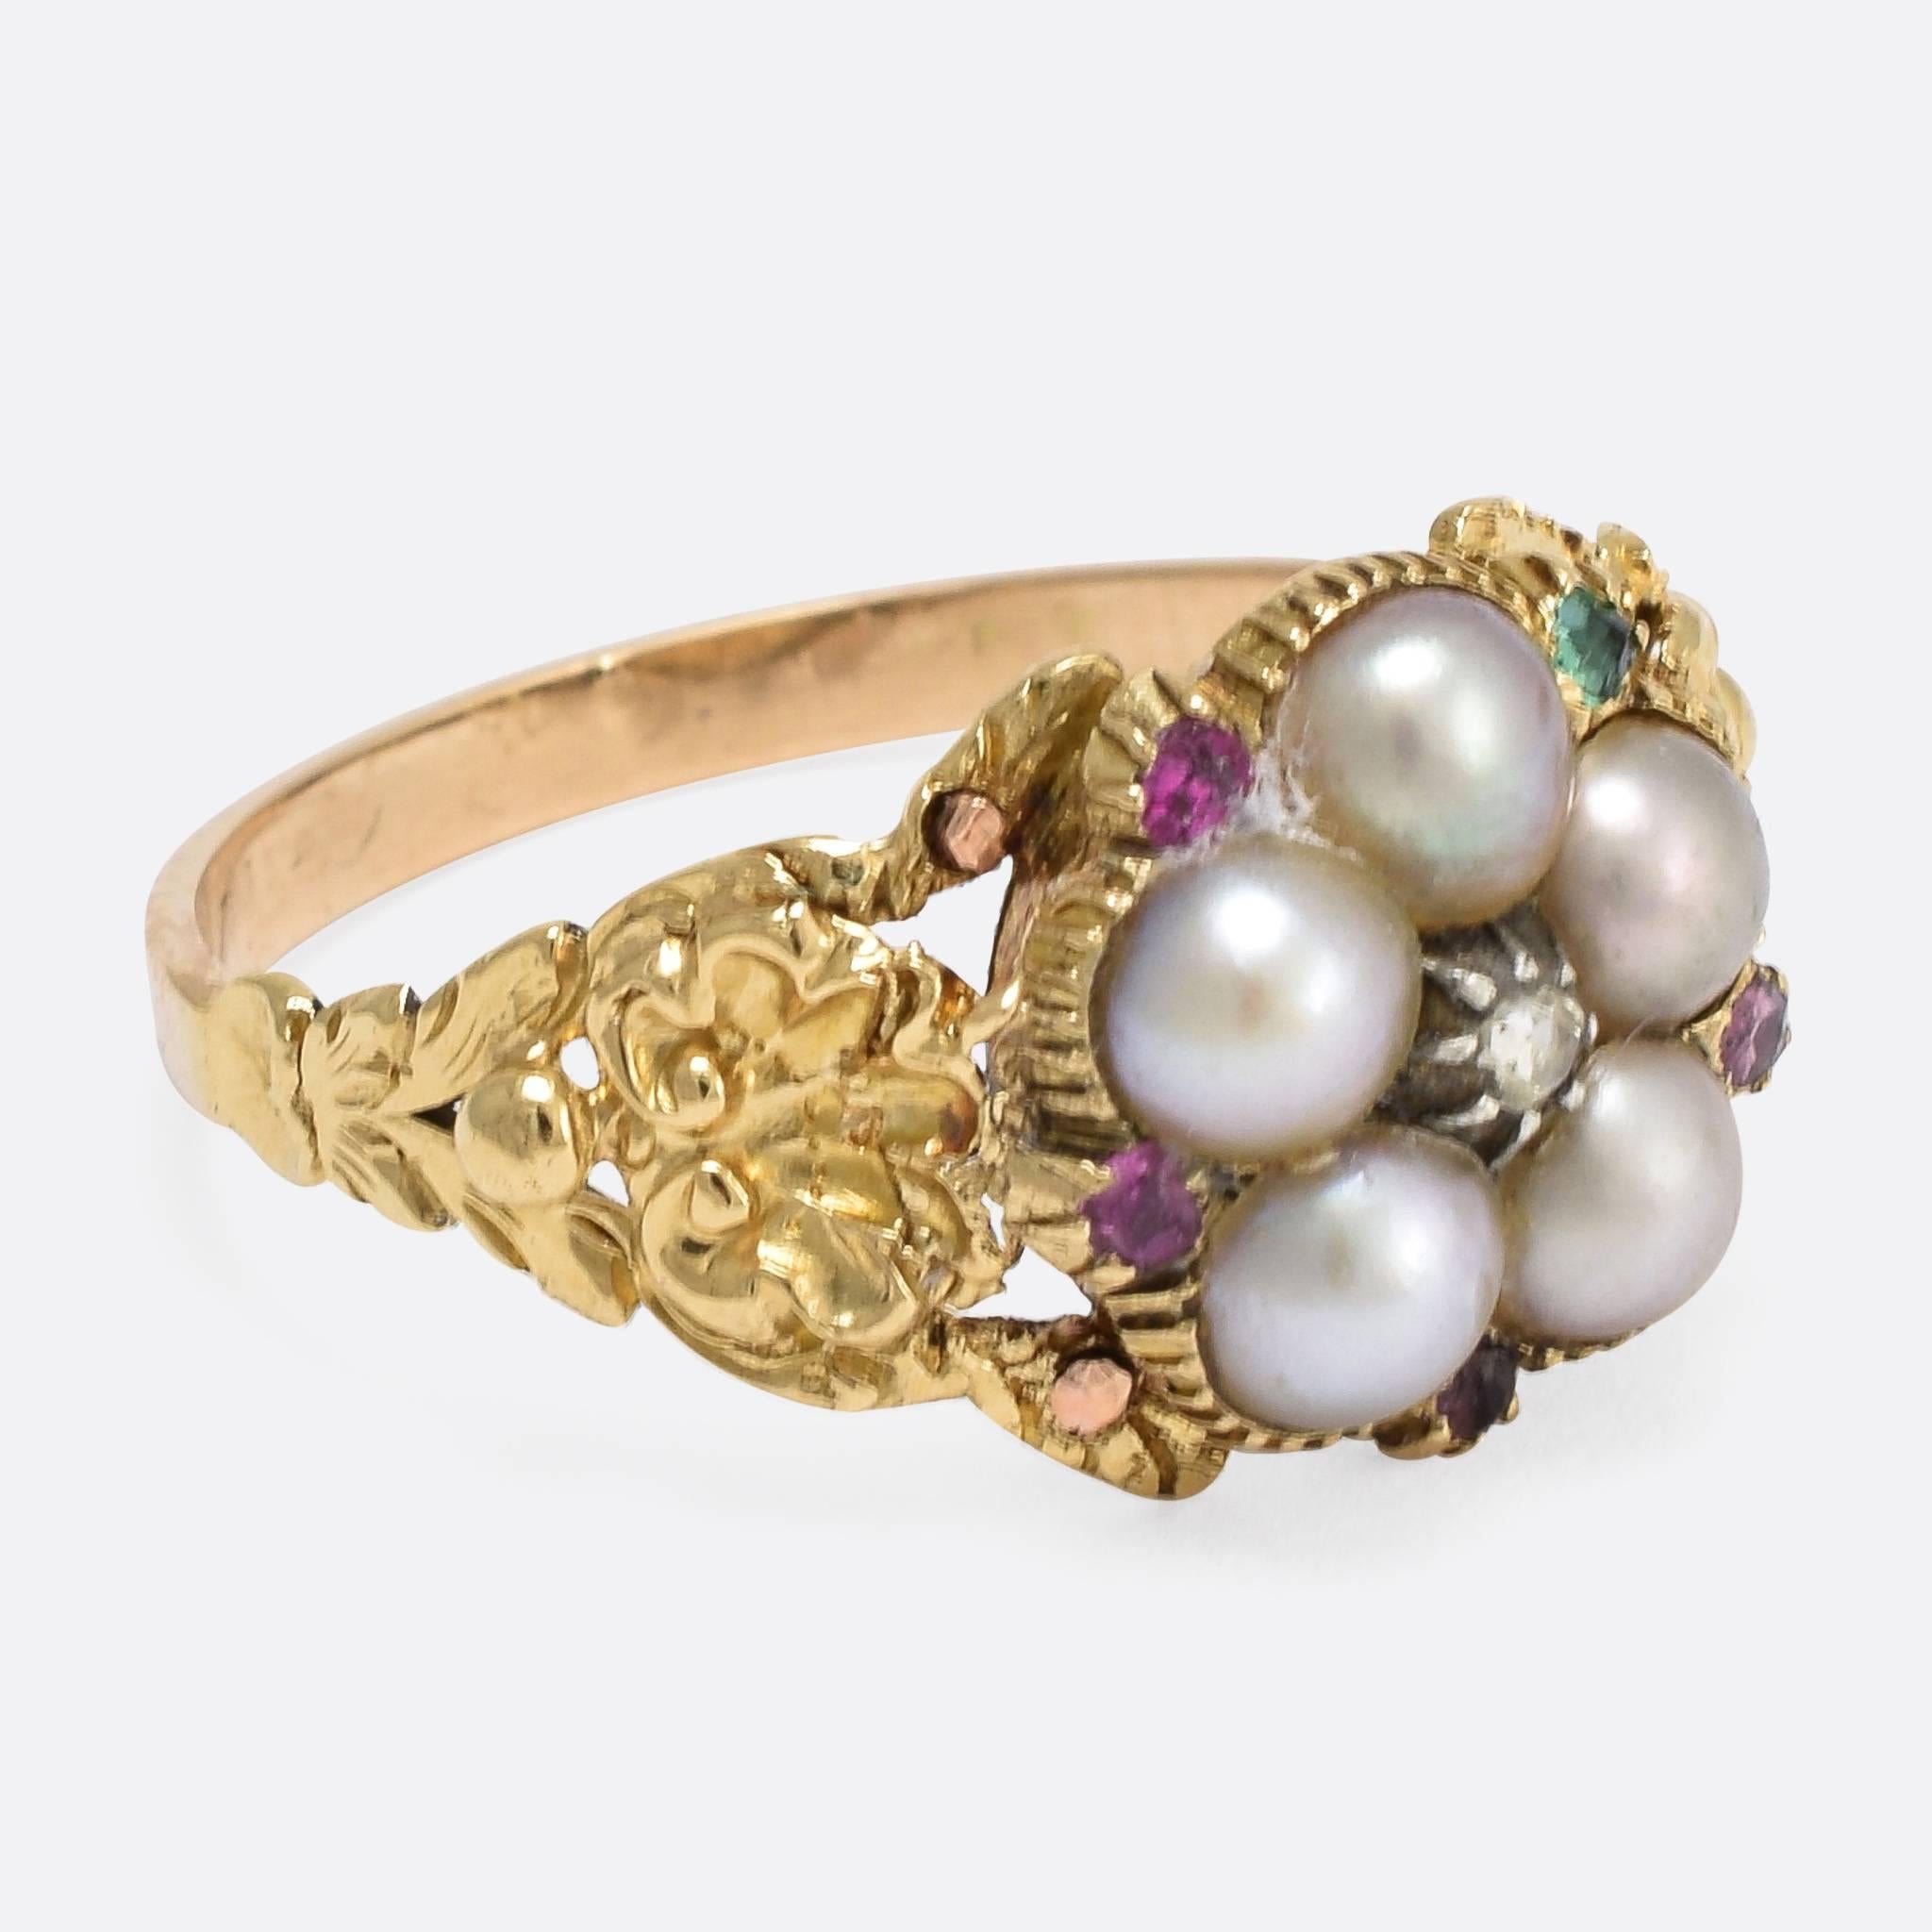 This impressive antique acrostic ring is set with natural pearls, and first letter of each coloured gemstone spells out the romantic sentiment "regard": ruby emerald garnet amethyst ruby diamond. The shoulders display beautiful shell and